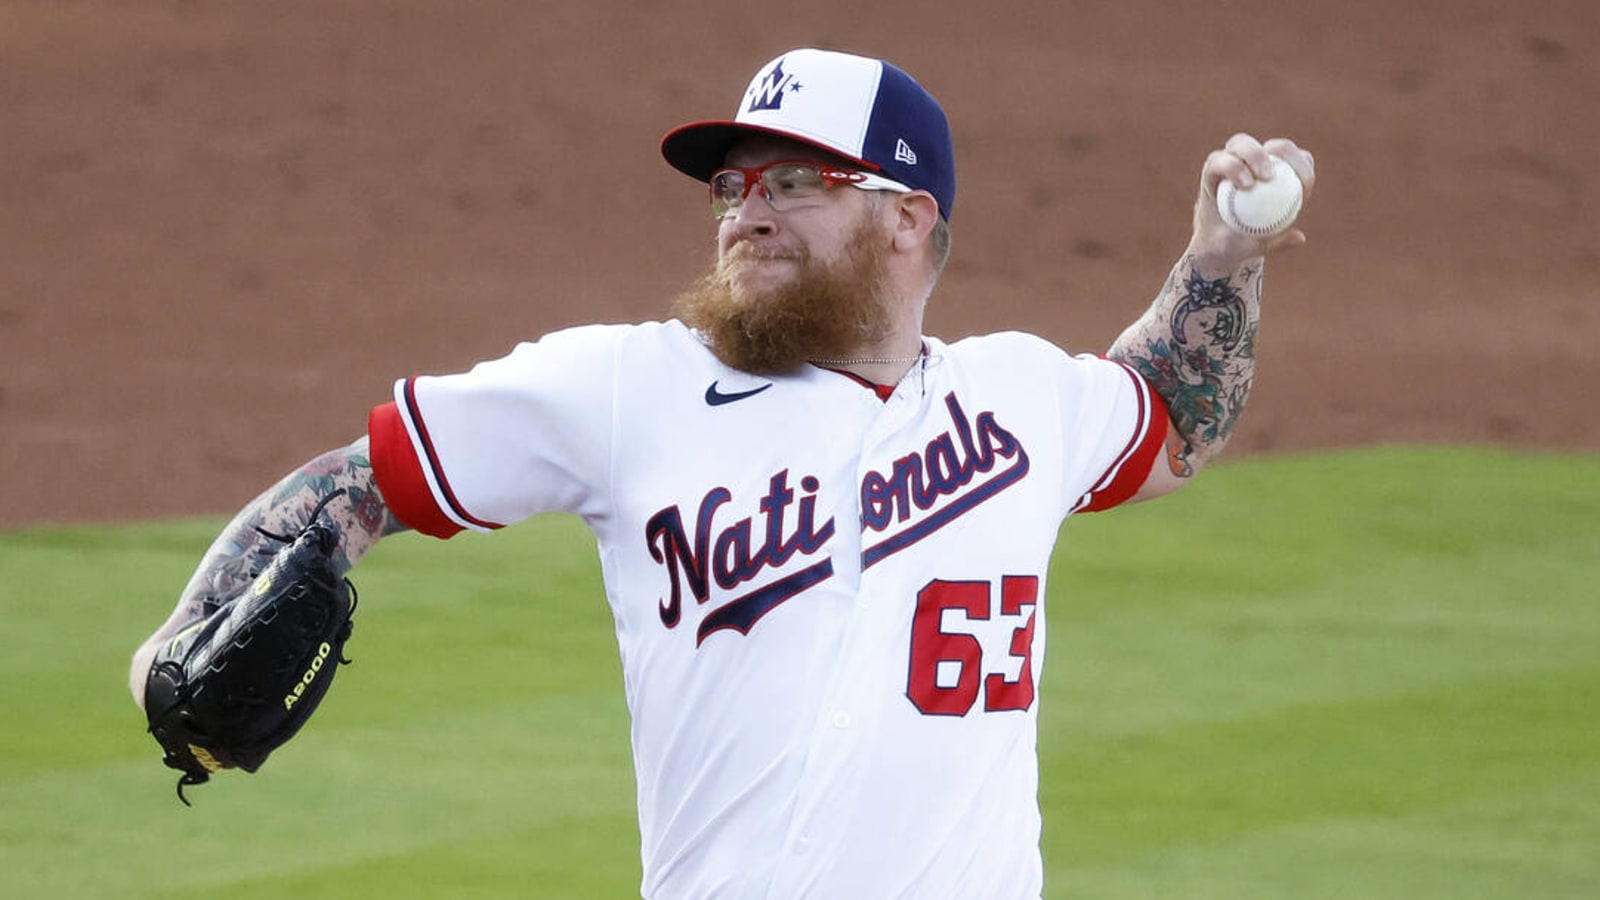 Nationals Pitcher Sean Doolittle Will Not Be Visiting the White House